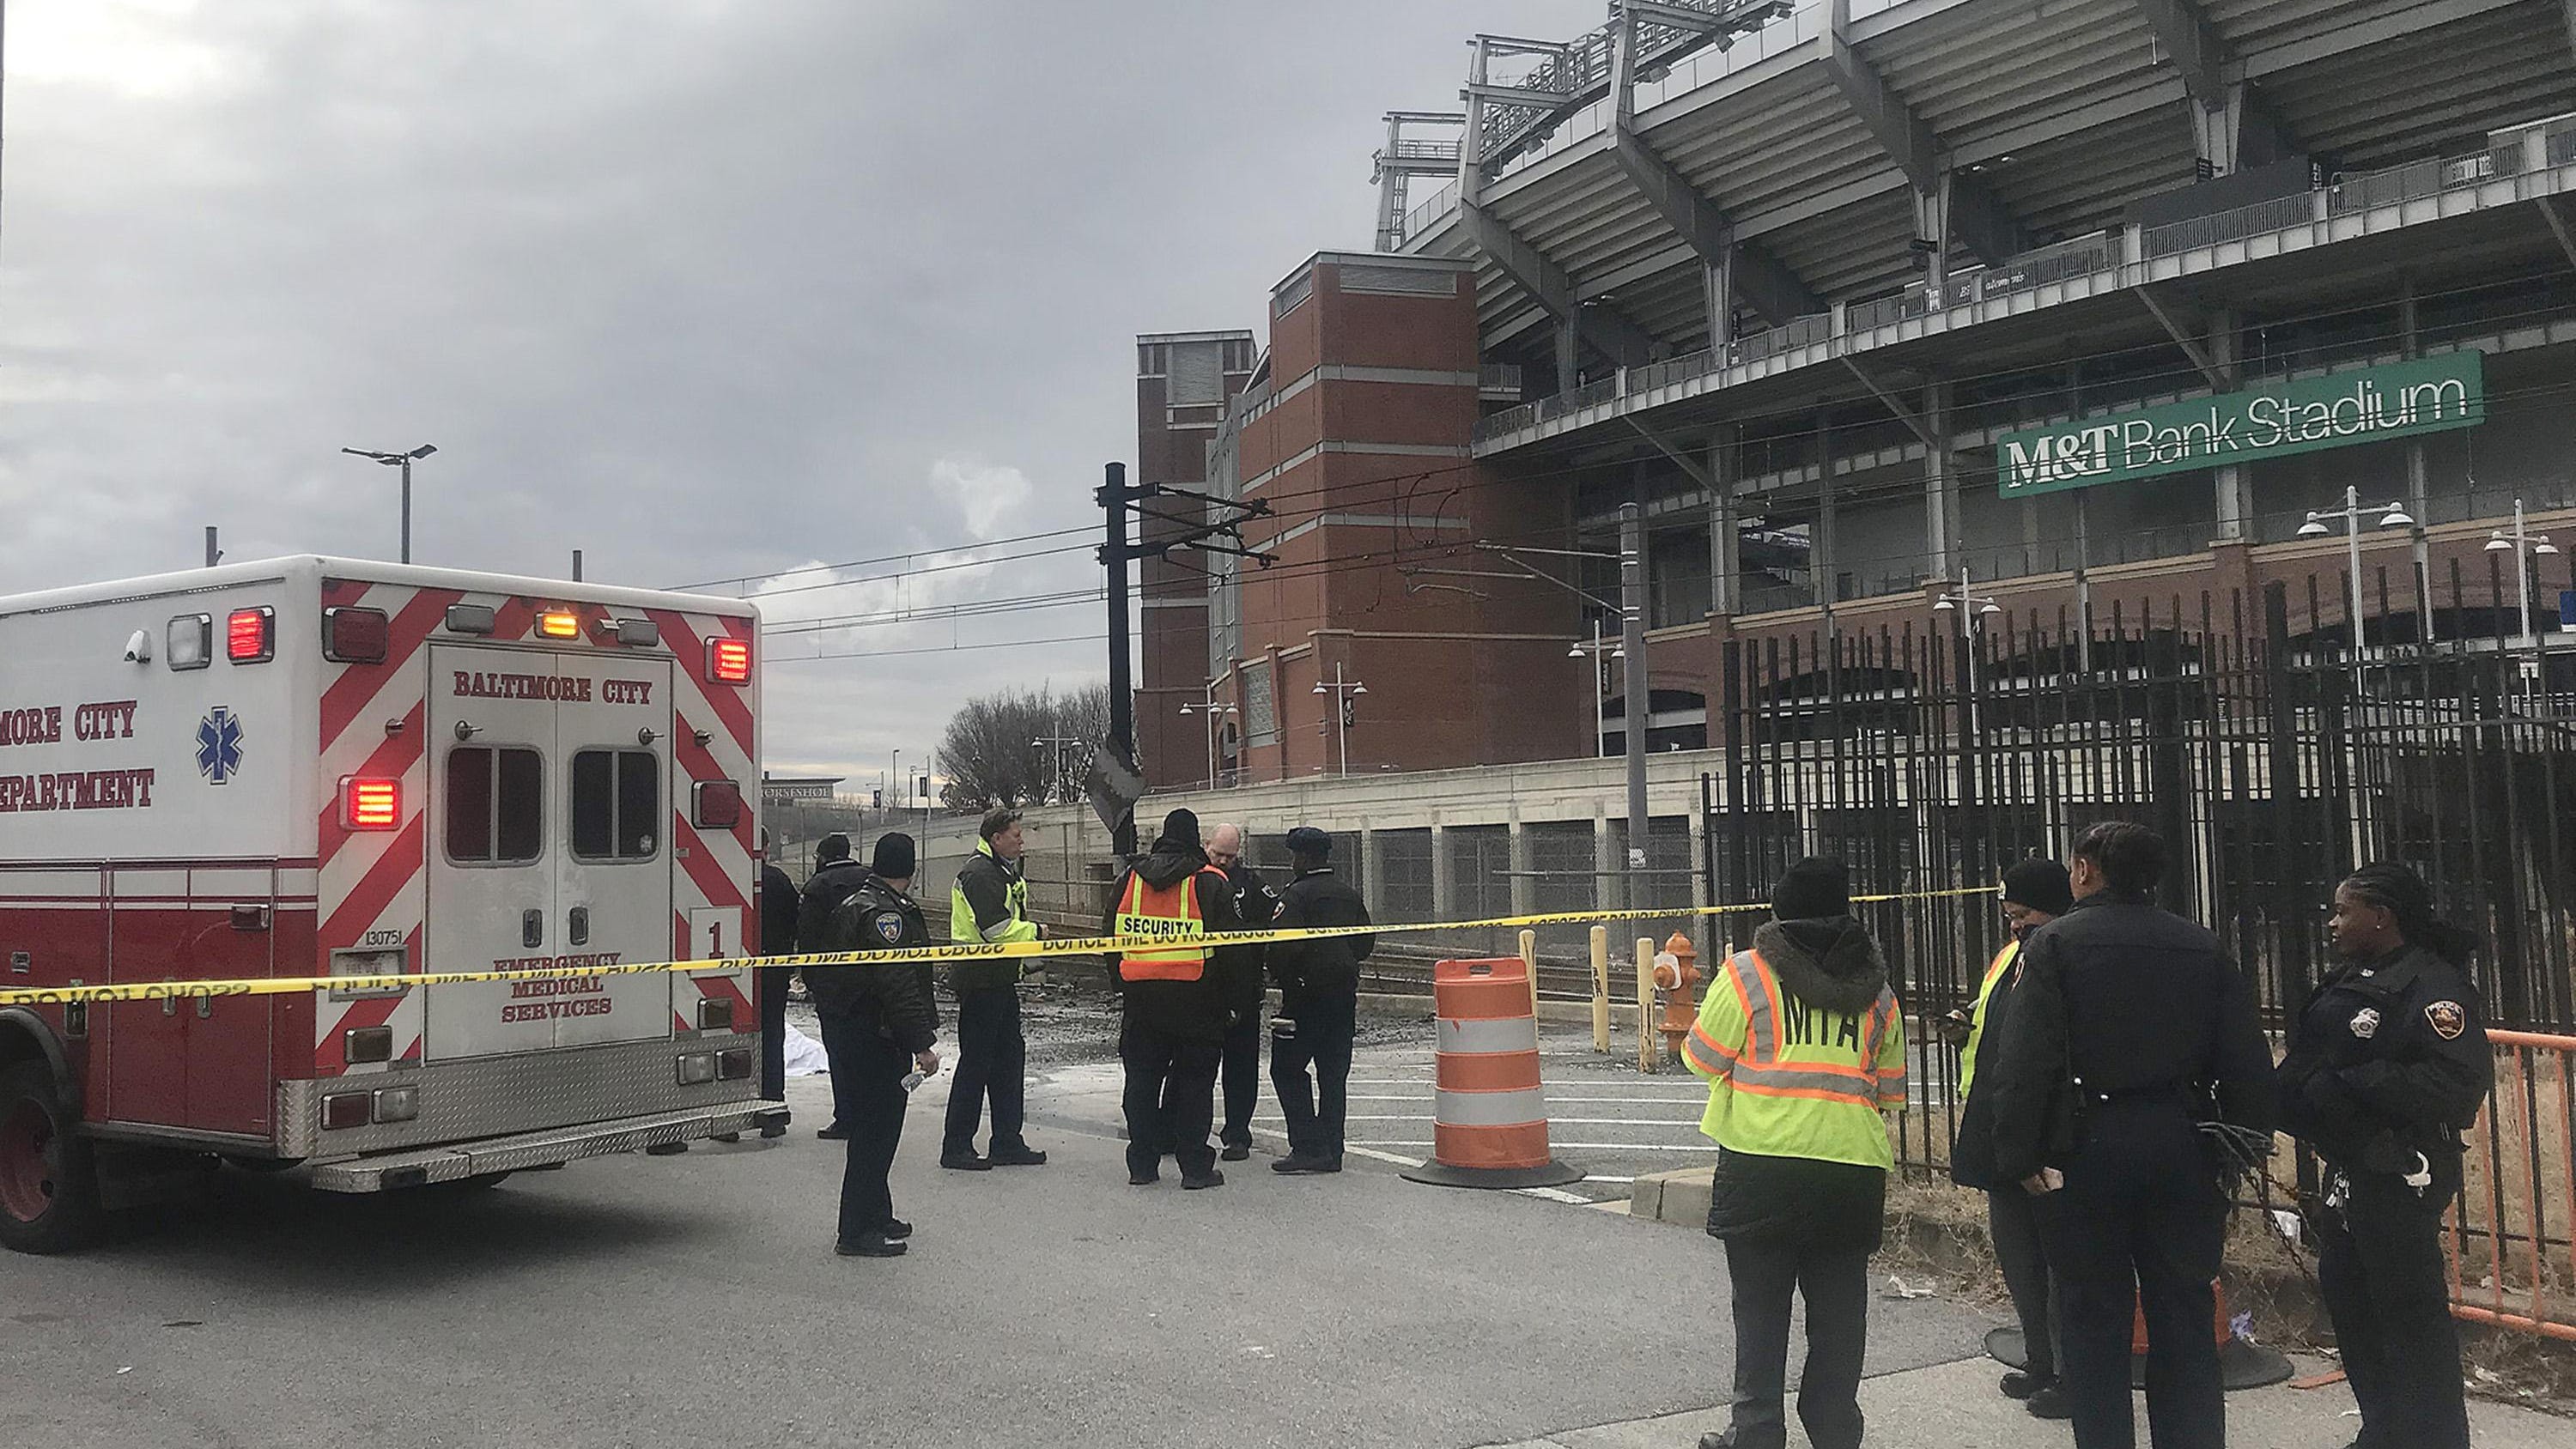 A man died after being engulfed in flames and running from a portable toilet that was also on fire in the parking lot of M&T Bank Stadium in Baltimore Sunday afternoon.